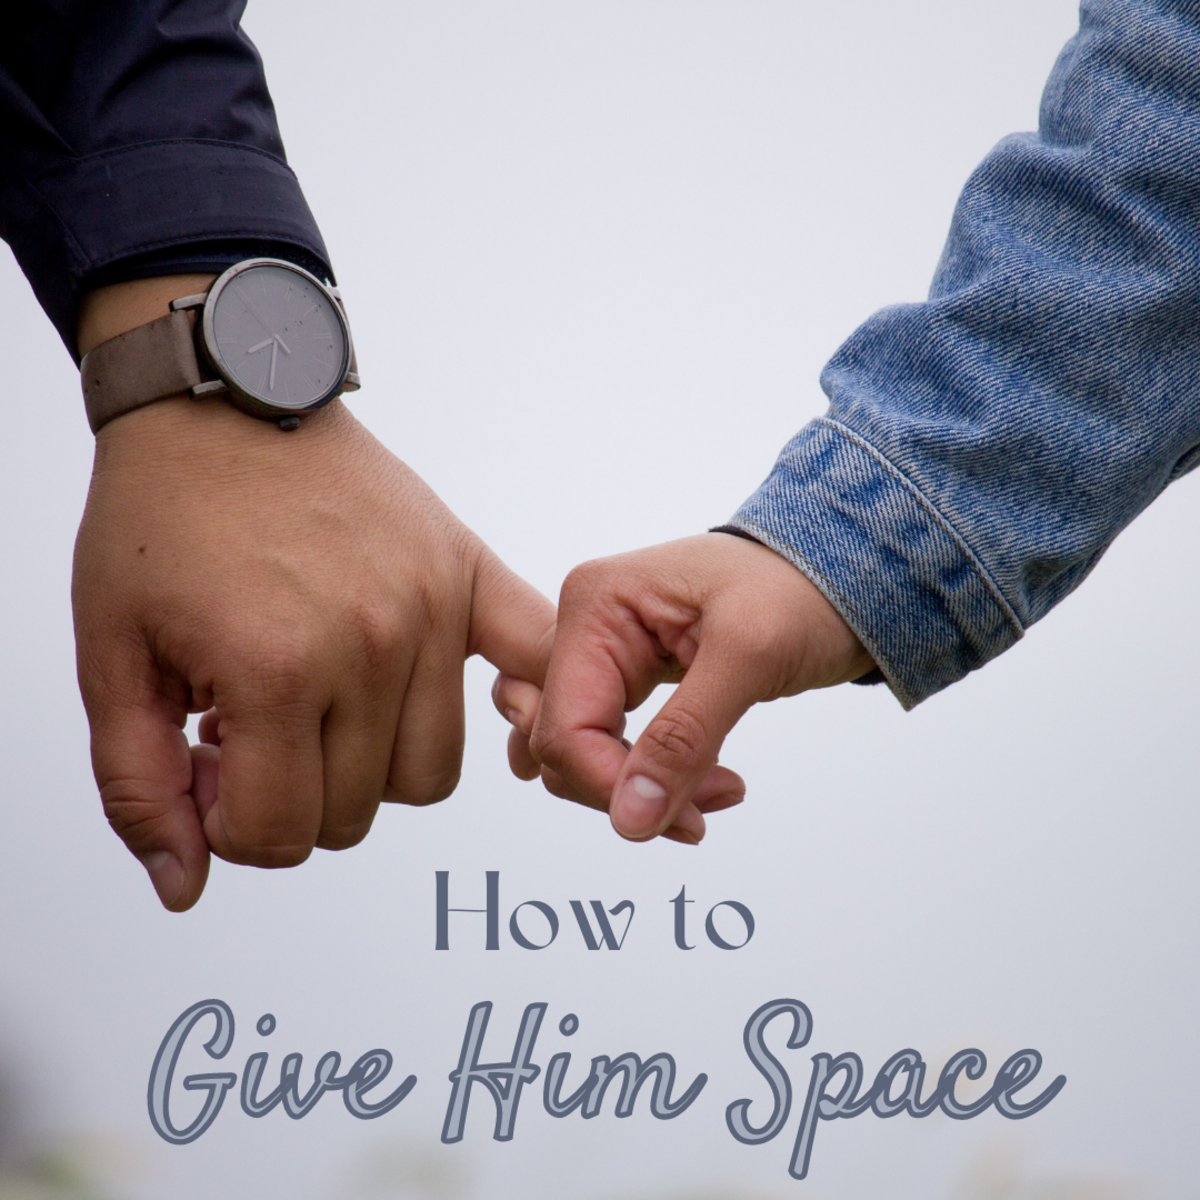 Are you constantly feeling worried about what your boyfriend's up to? Don't get caught up in these negative emotions—learn how to give him his space!